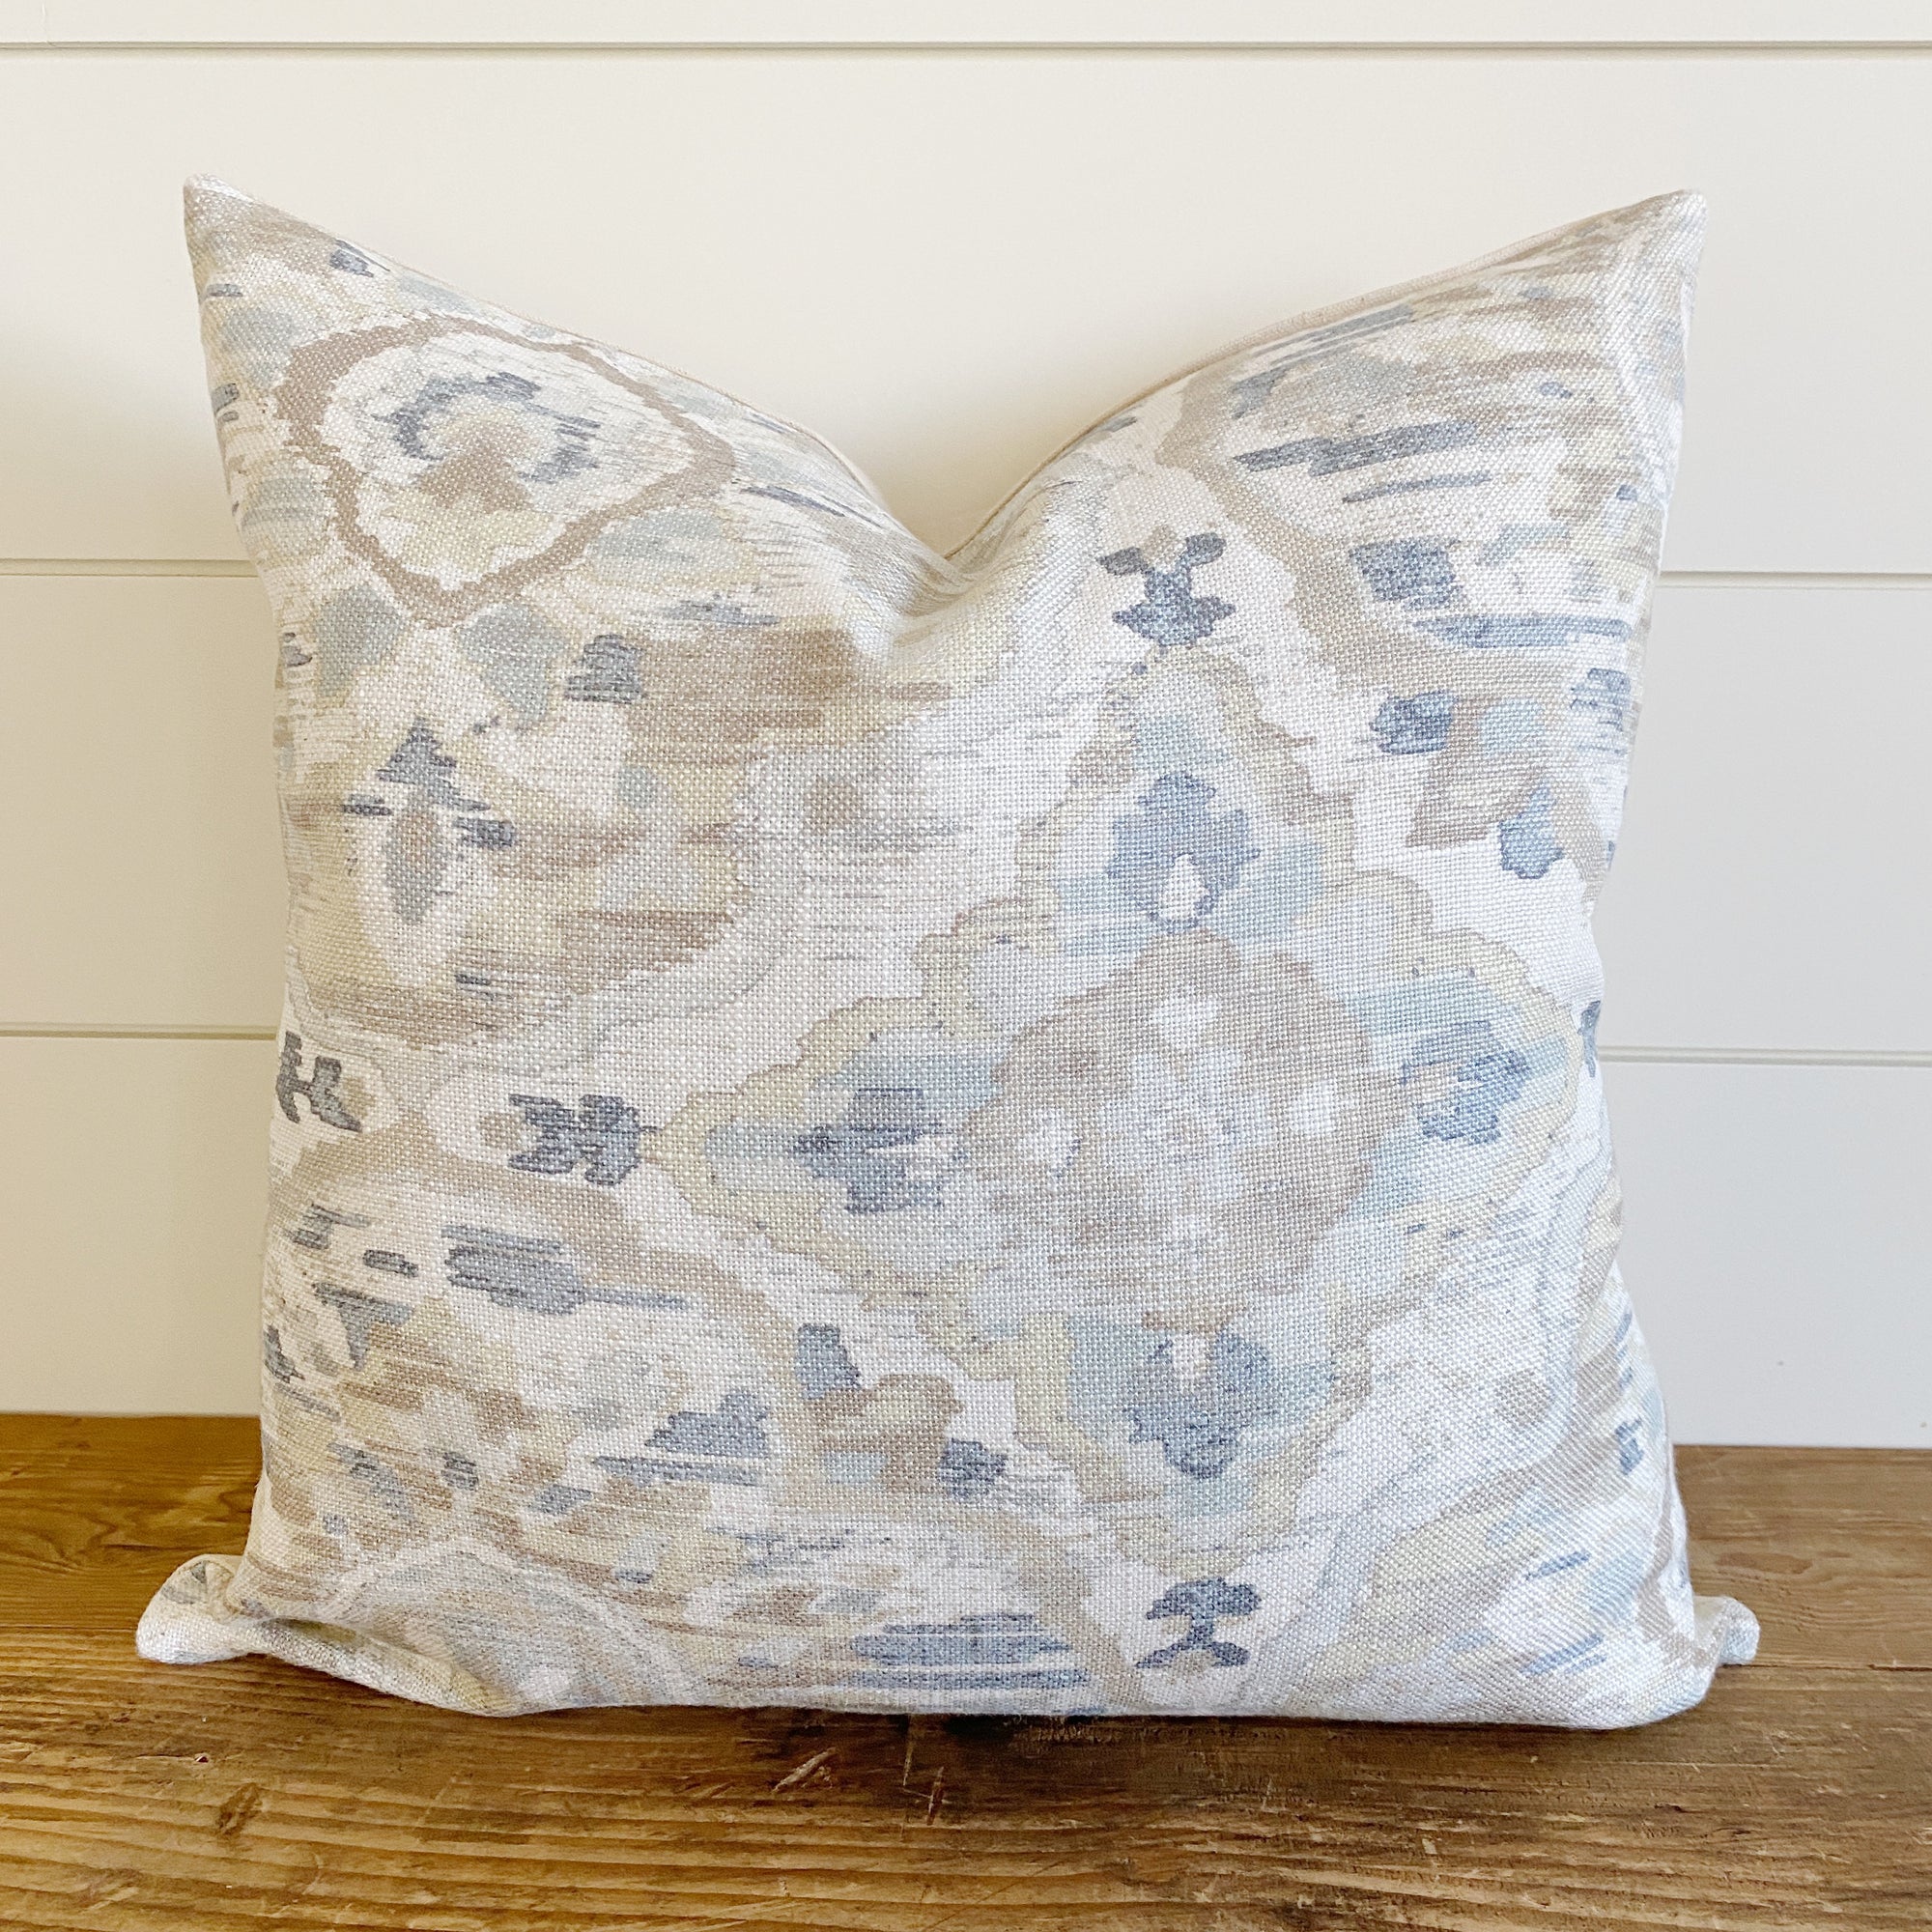 EVERLY || Watercolor Floral Pillow Cover